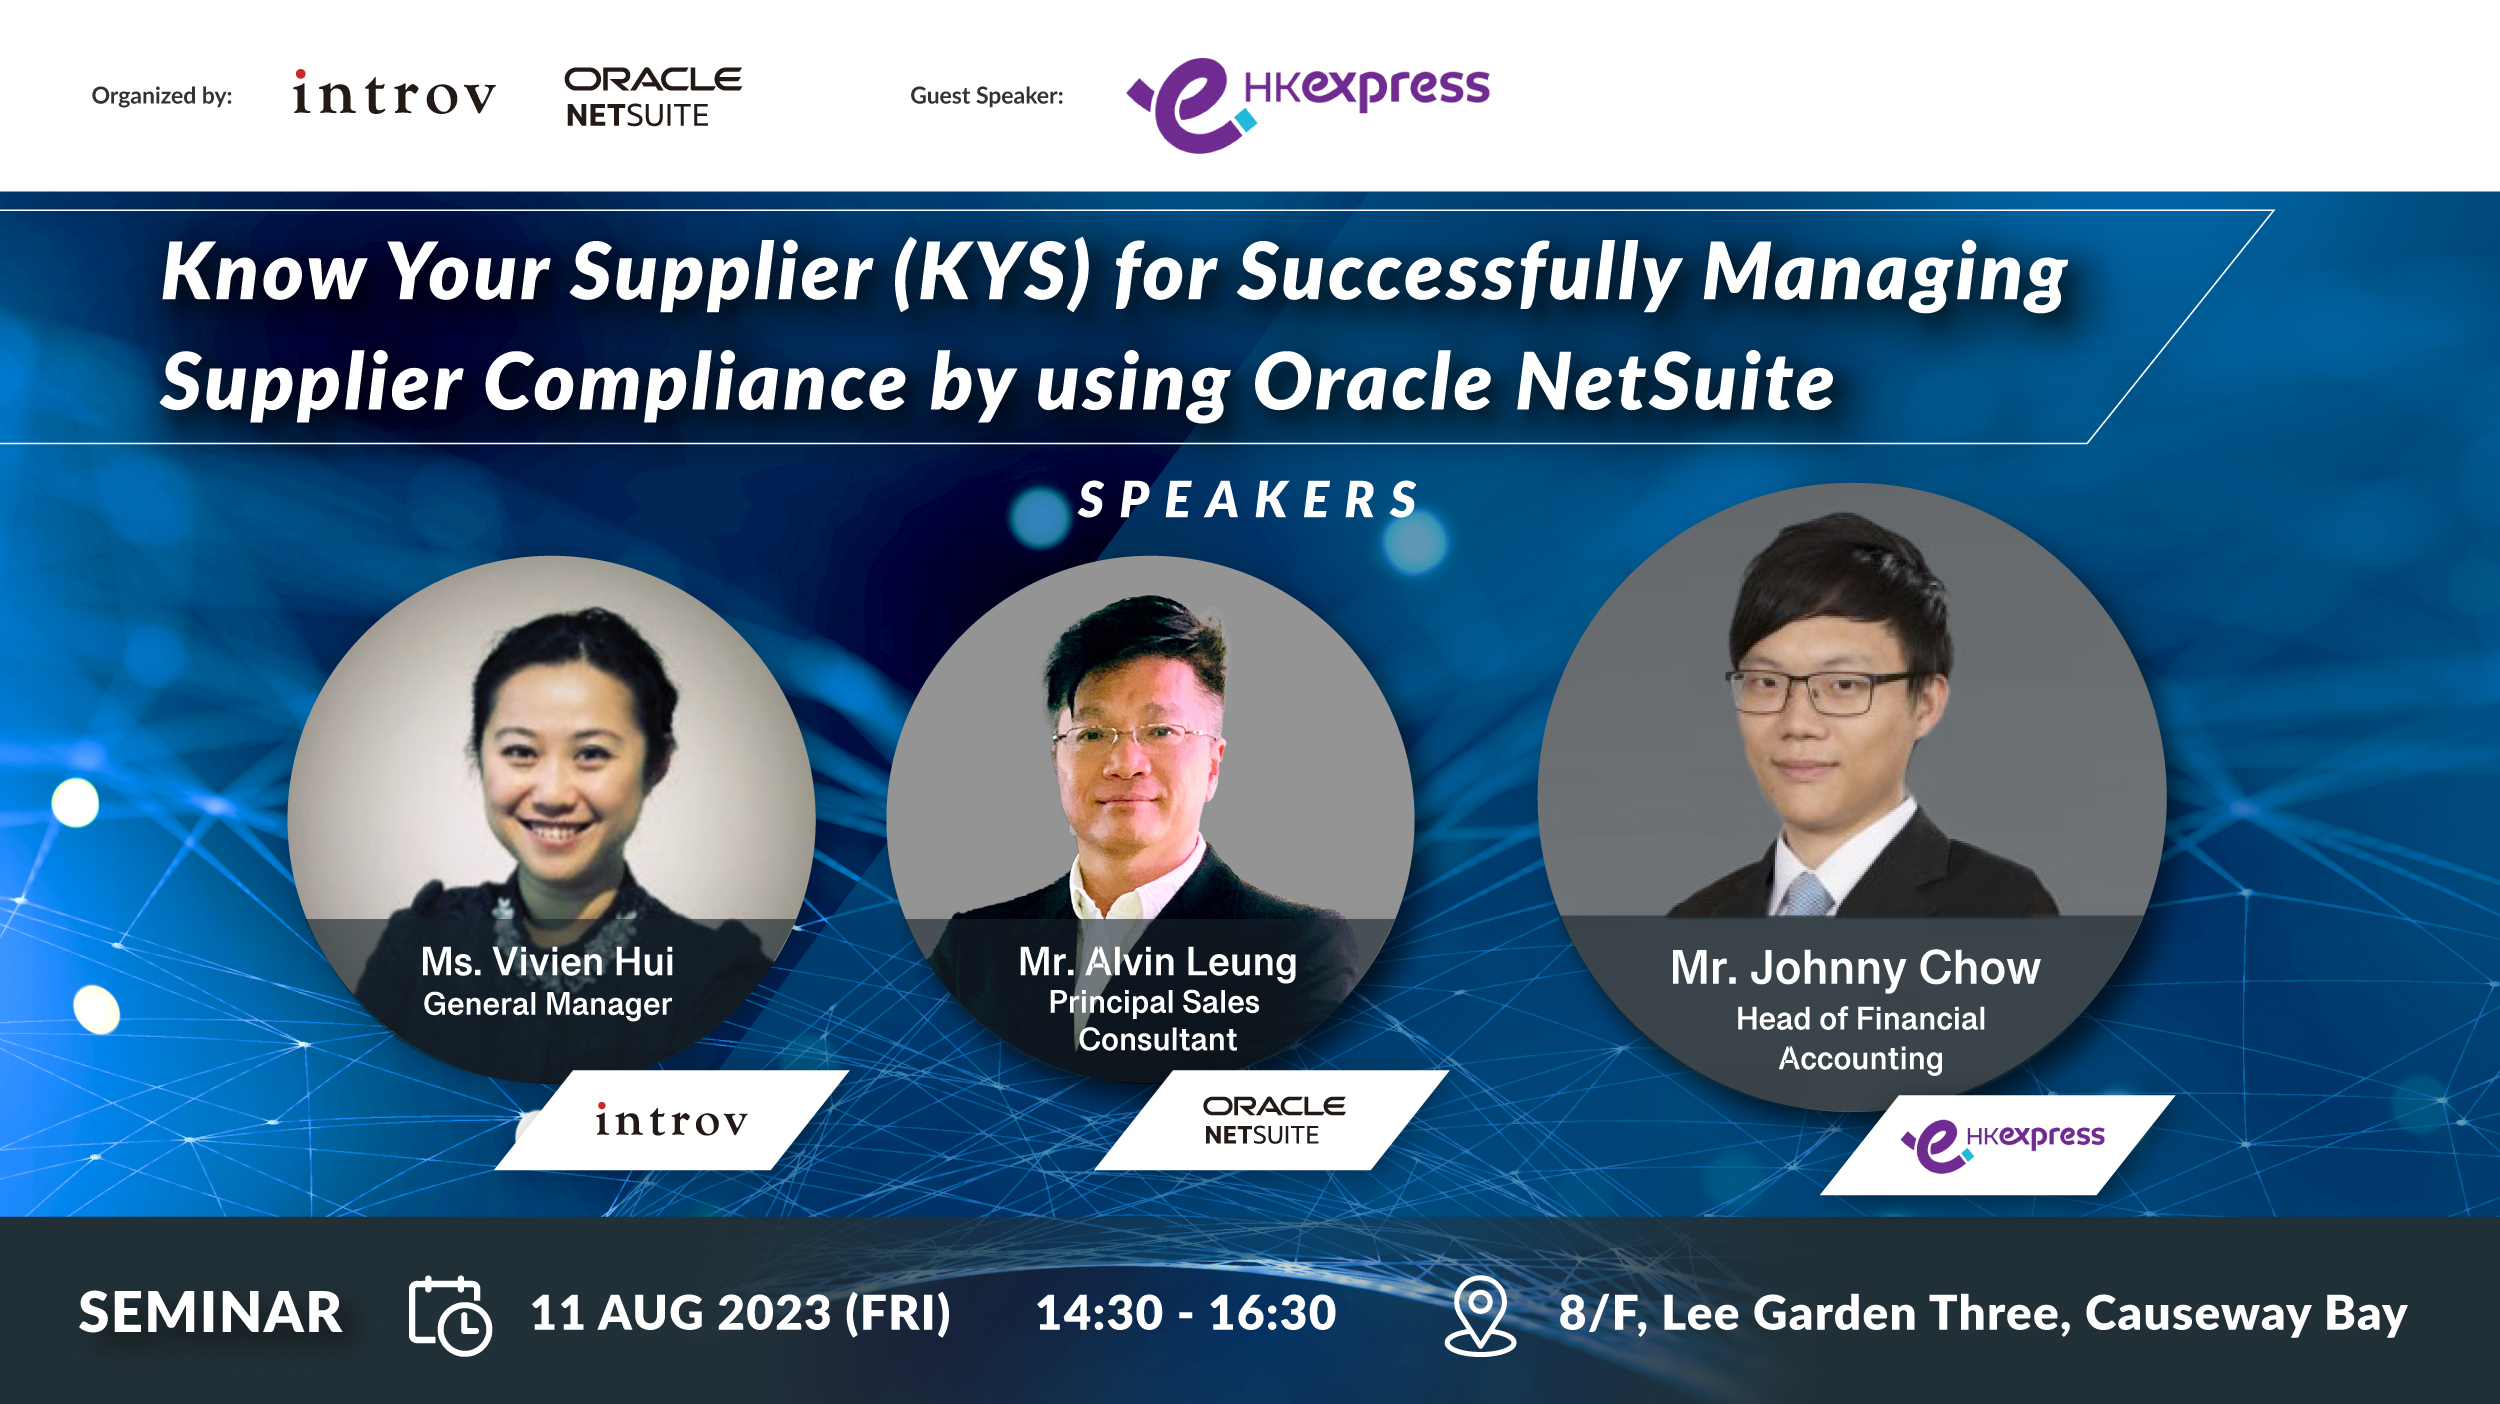 Seminar: Know Your Supplier (KYS) for Successfully Managing Supplier Compliance by using Oracle NetSuite (11 Aug 2023)